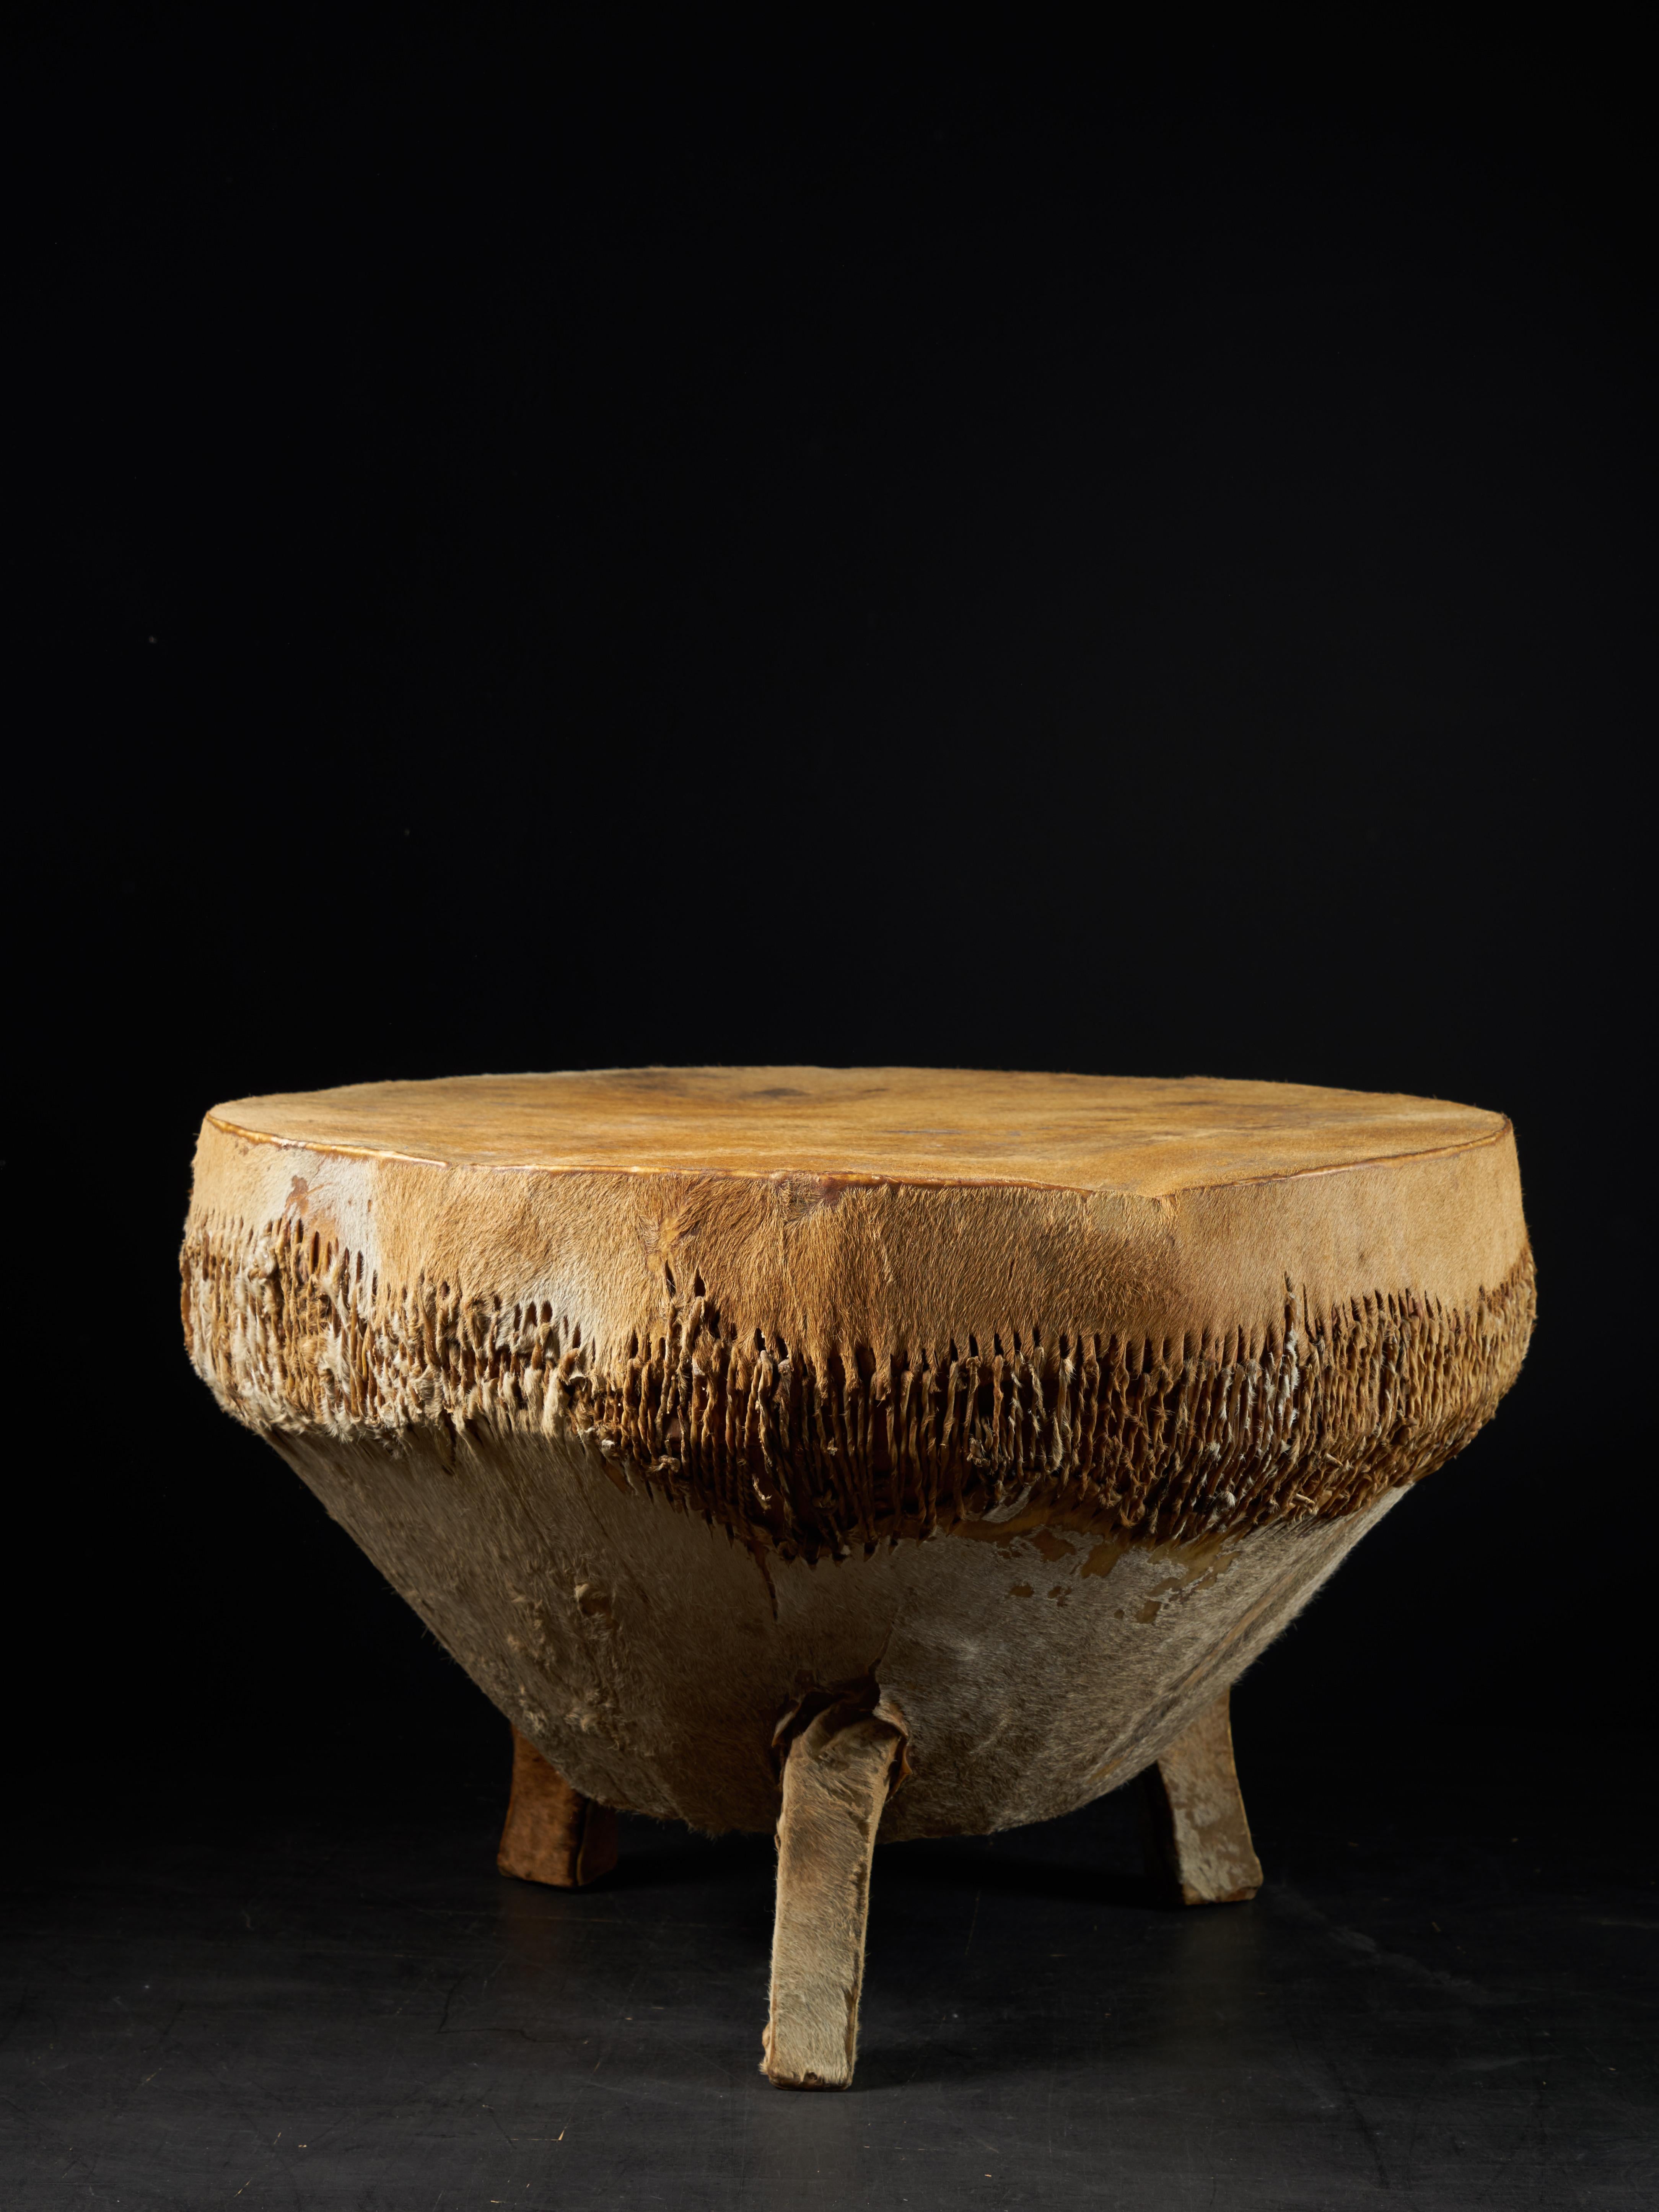 This Ingoma drum is covered with a membrane of animal skin. The drum is usually cylindrical in form and the top broader than the bottom it originates from the Tutsi people, an ethic group living within Rwanda and Burundi. The Tutsi formed the